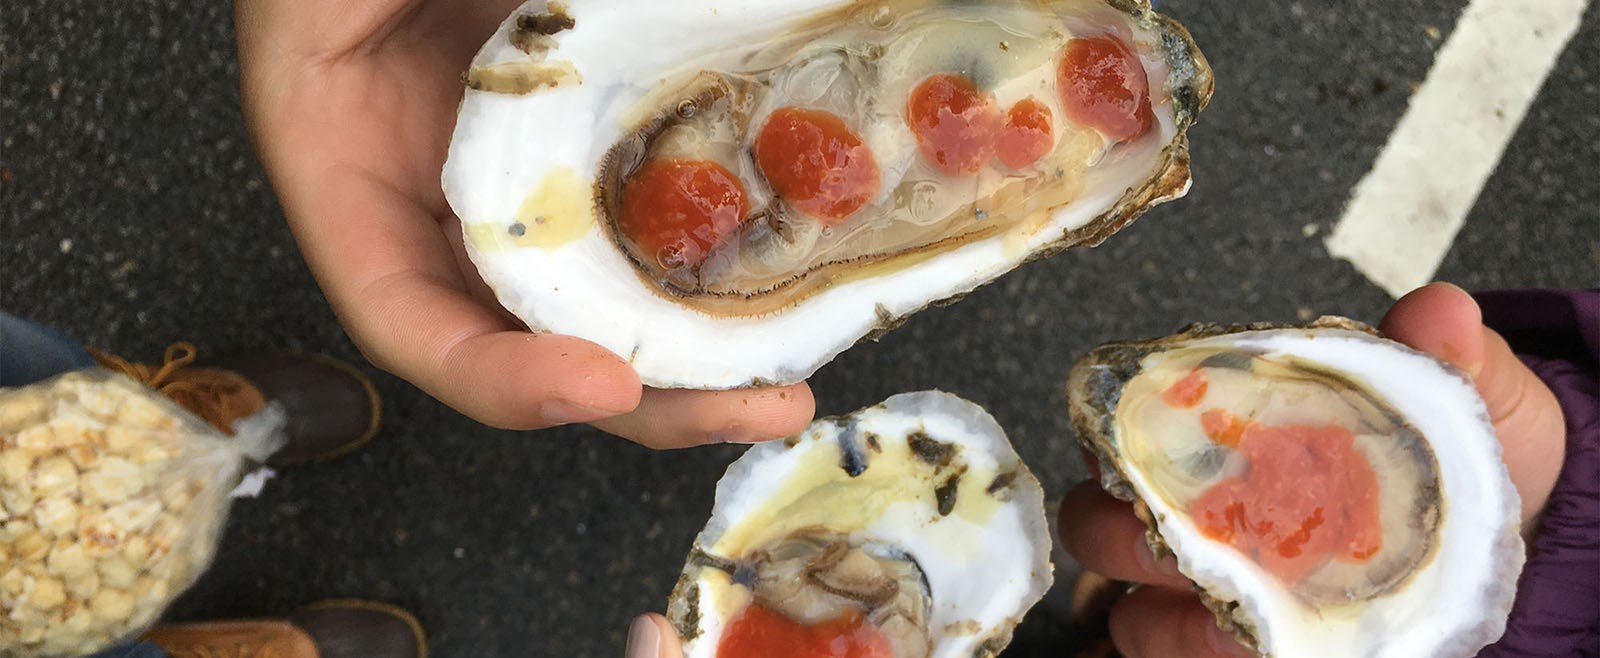 Annual Wellfleet Oyster Festival including a shucking contest and local vendors selling homemade chocolate, jewelry, art, and more